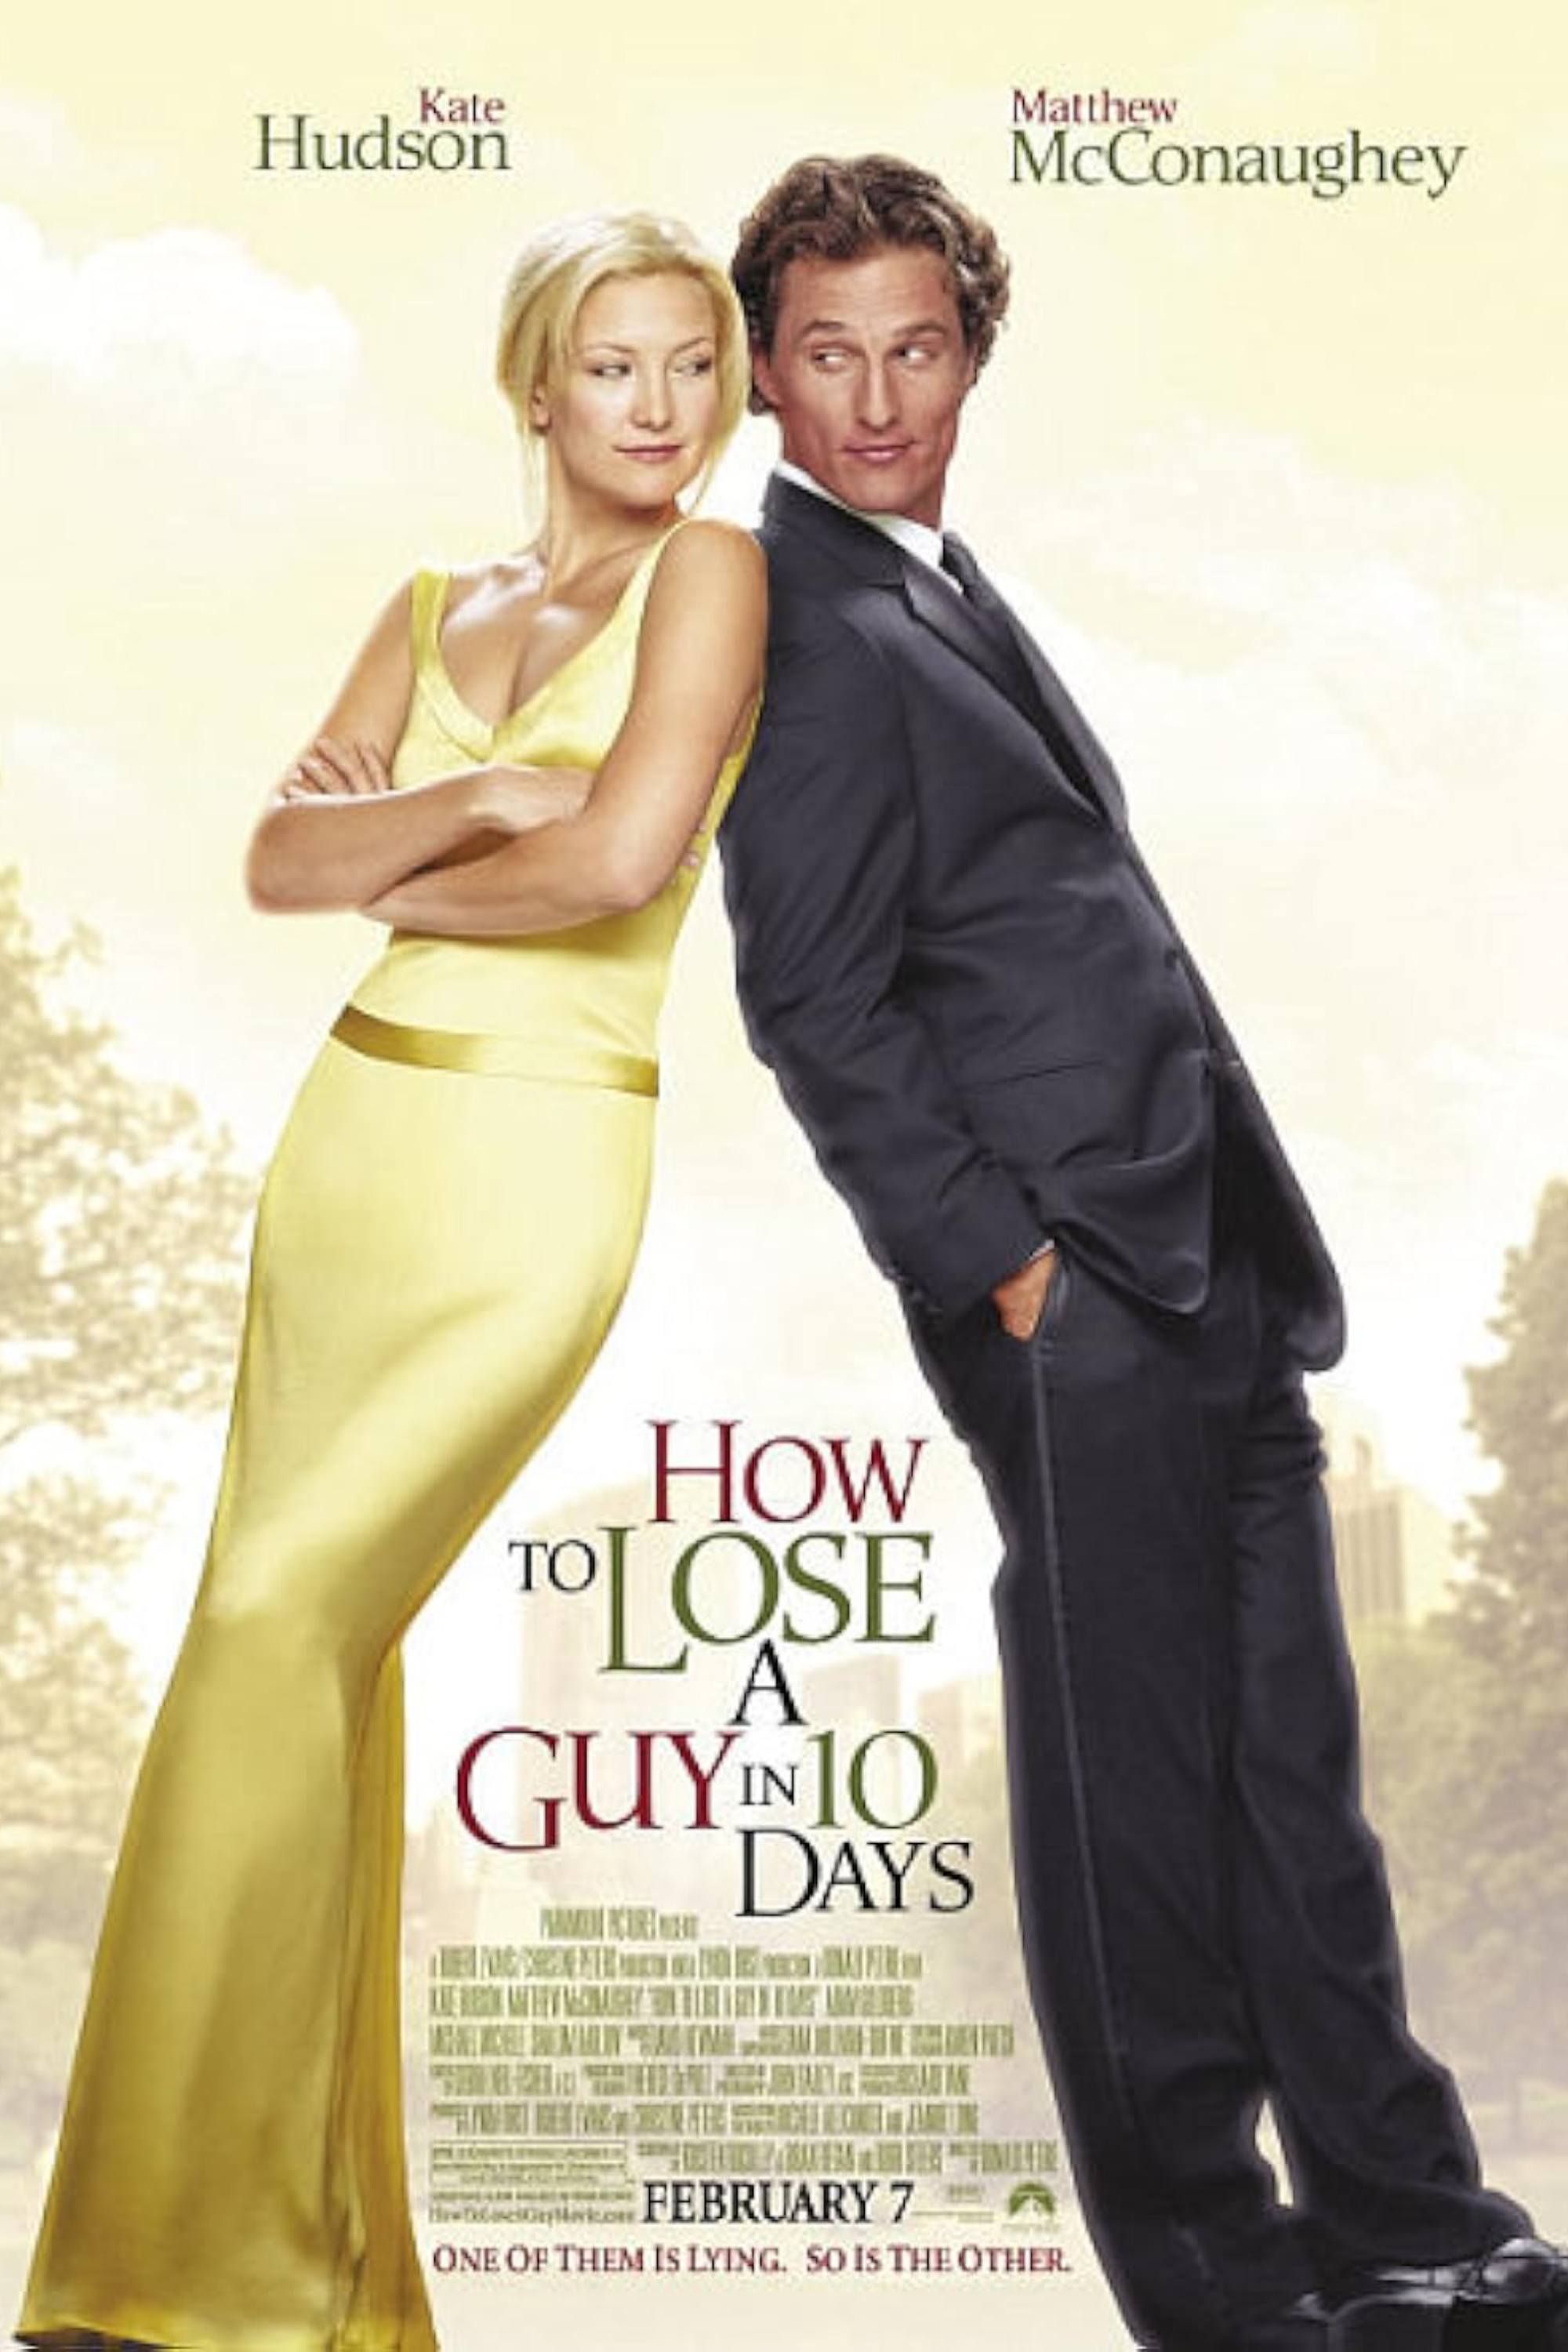 How to Lose A Guy In 10 Days - Poster - Kate Hudson & Matthew McConaughey Leaning on each other